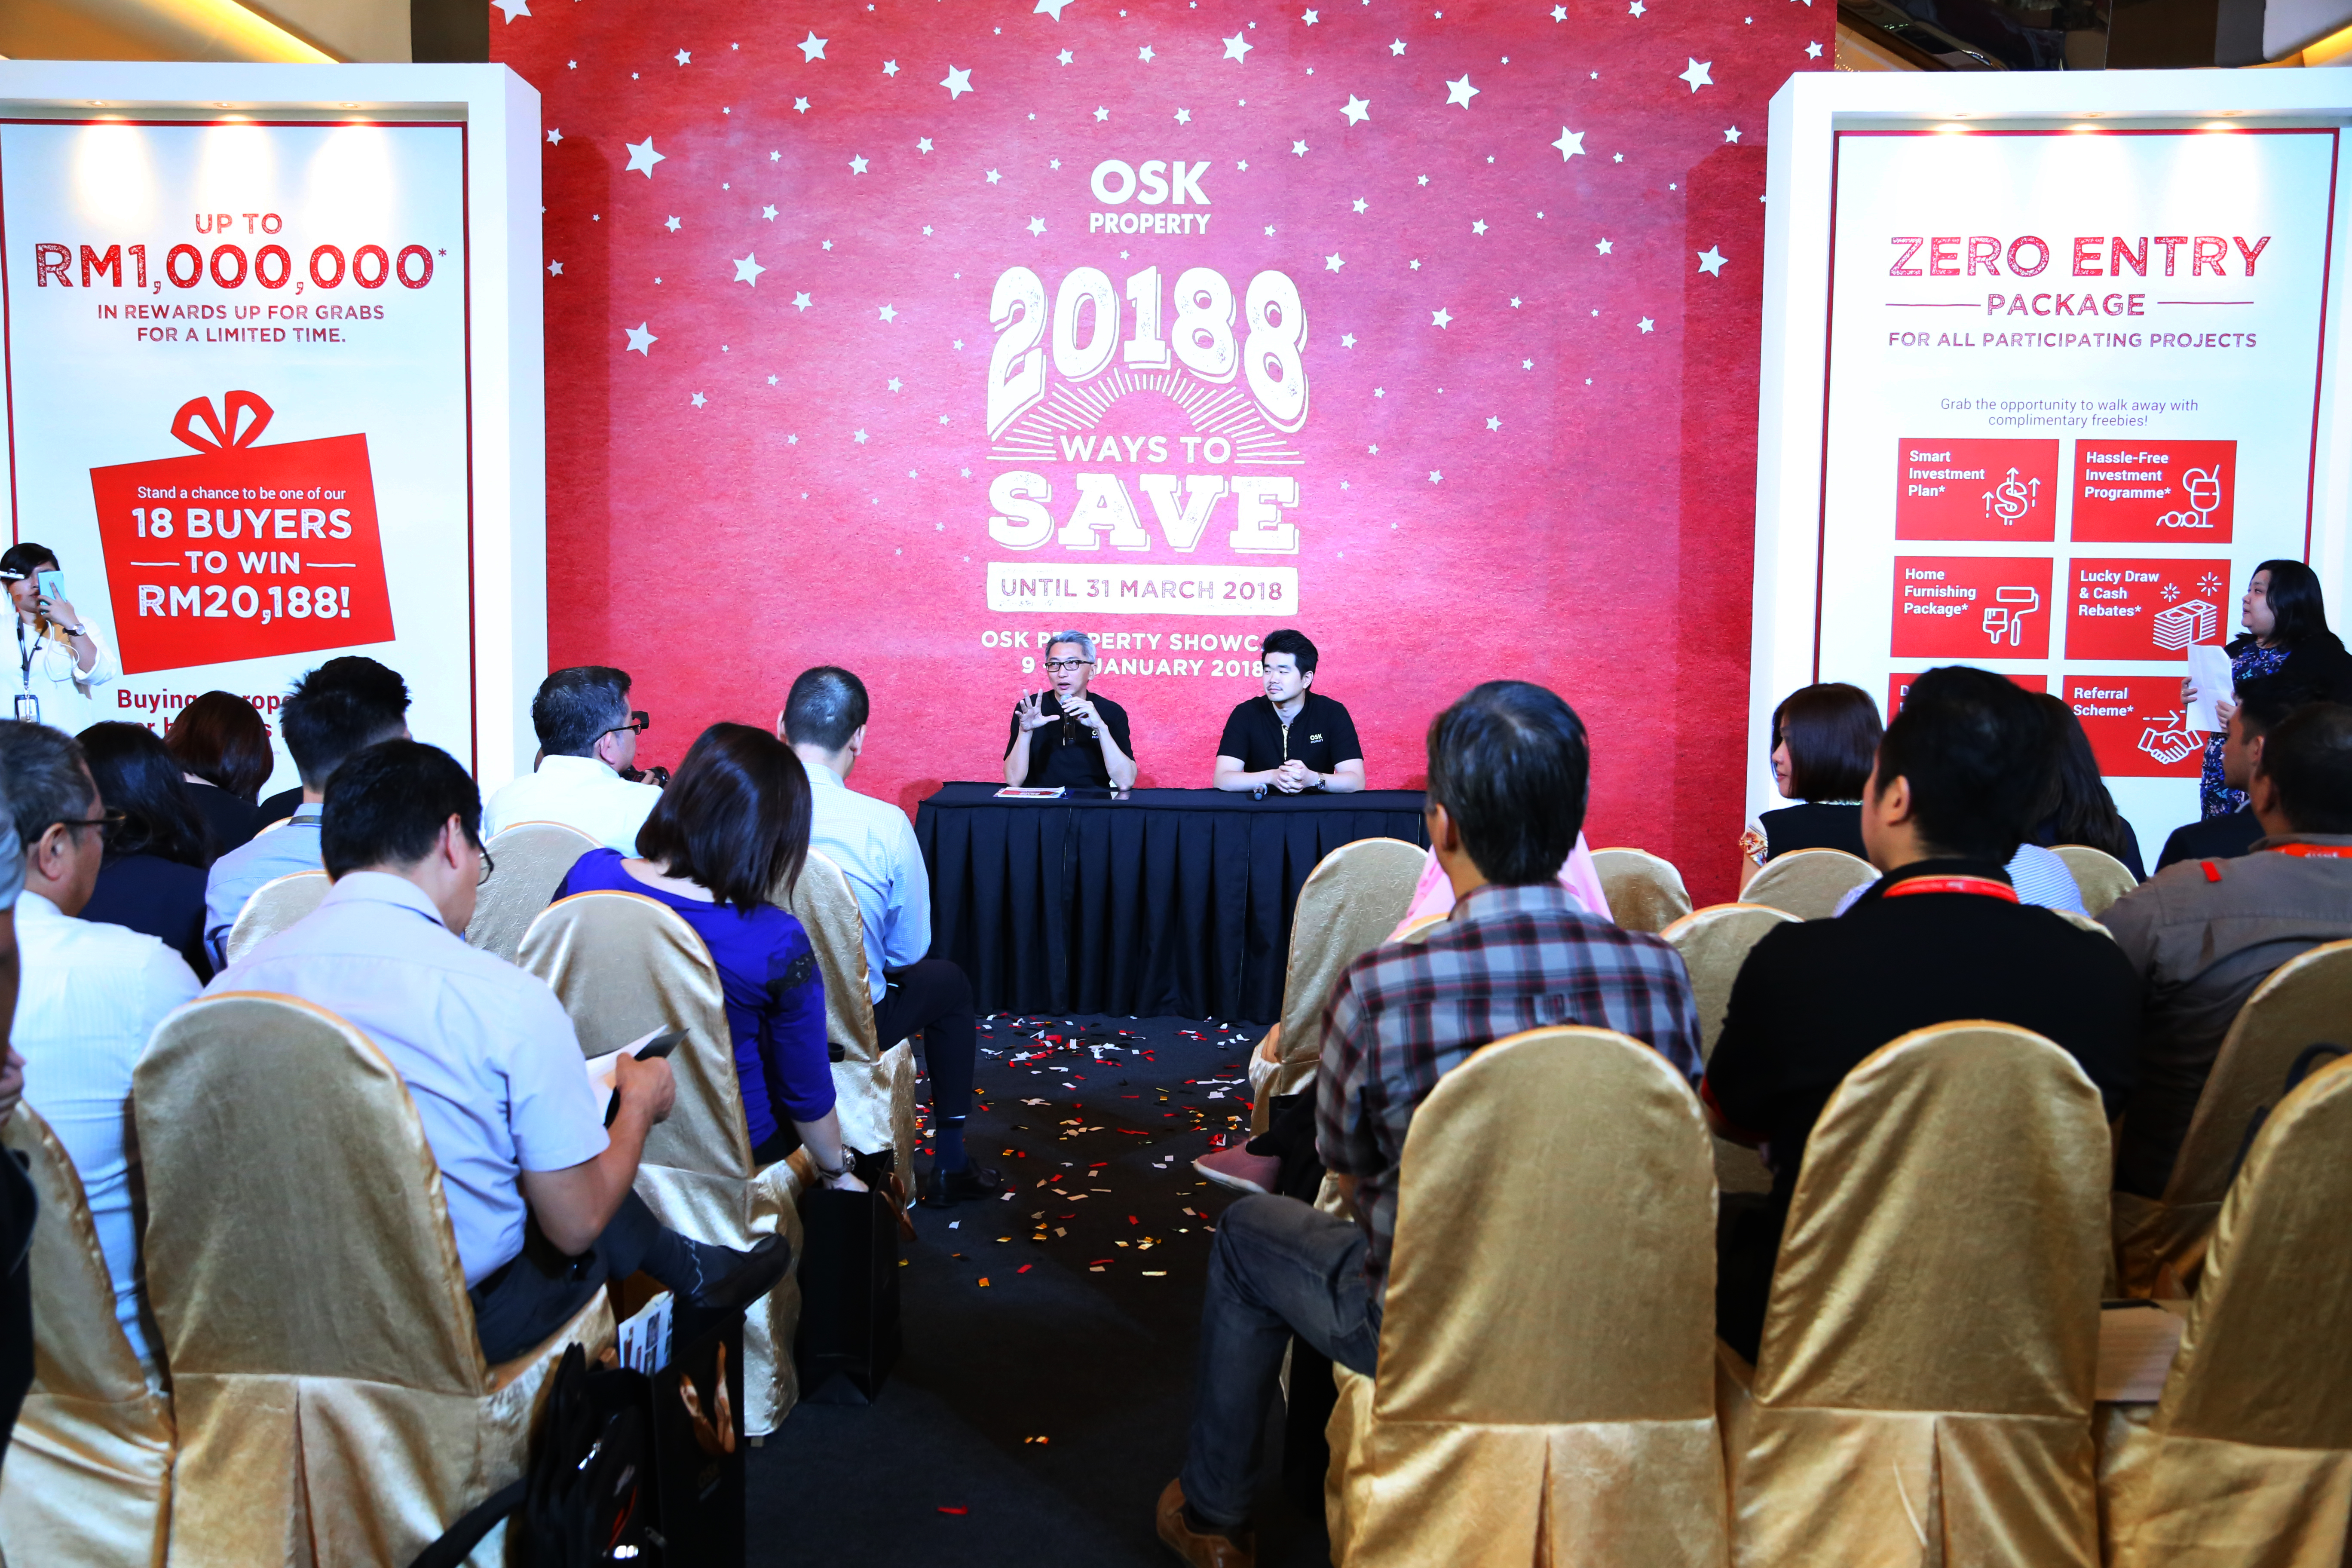 OSK Property Celebrates New Year with “20188 Zero Entry Campaign”